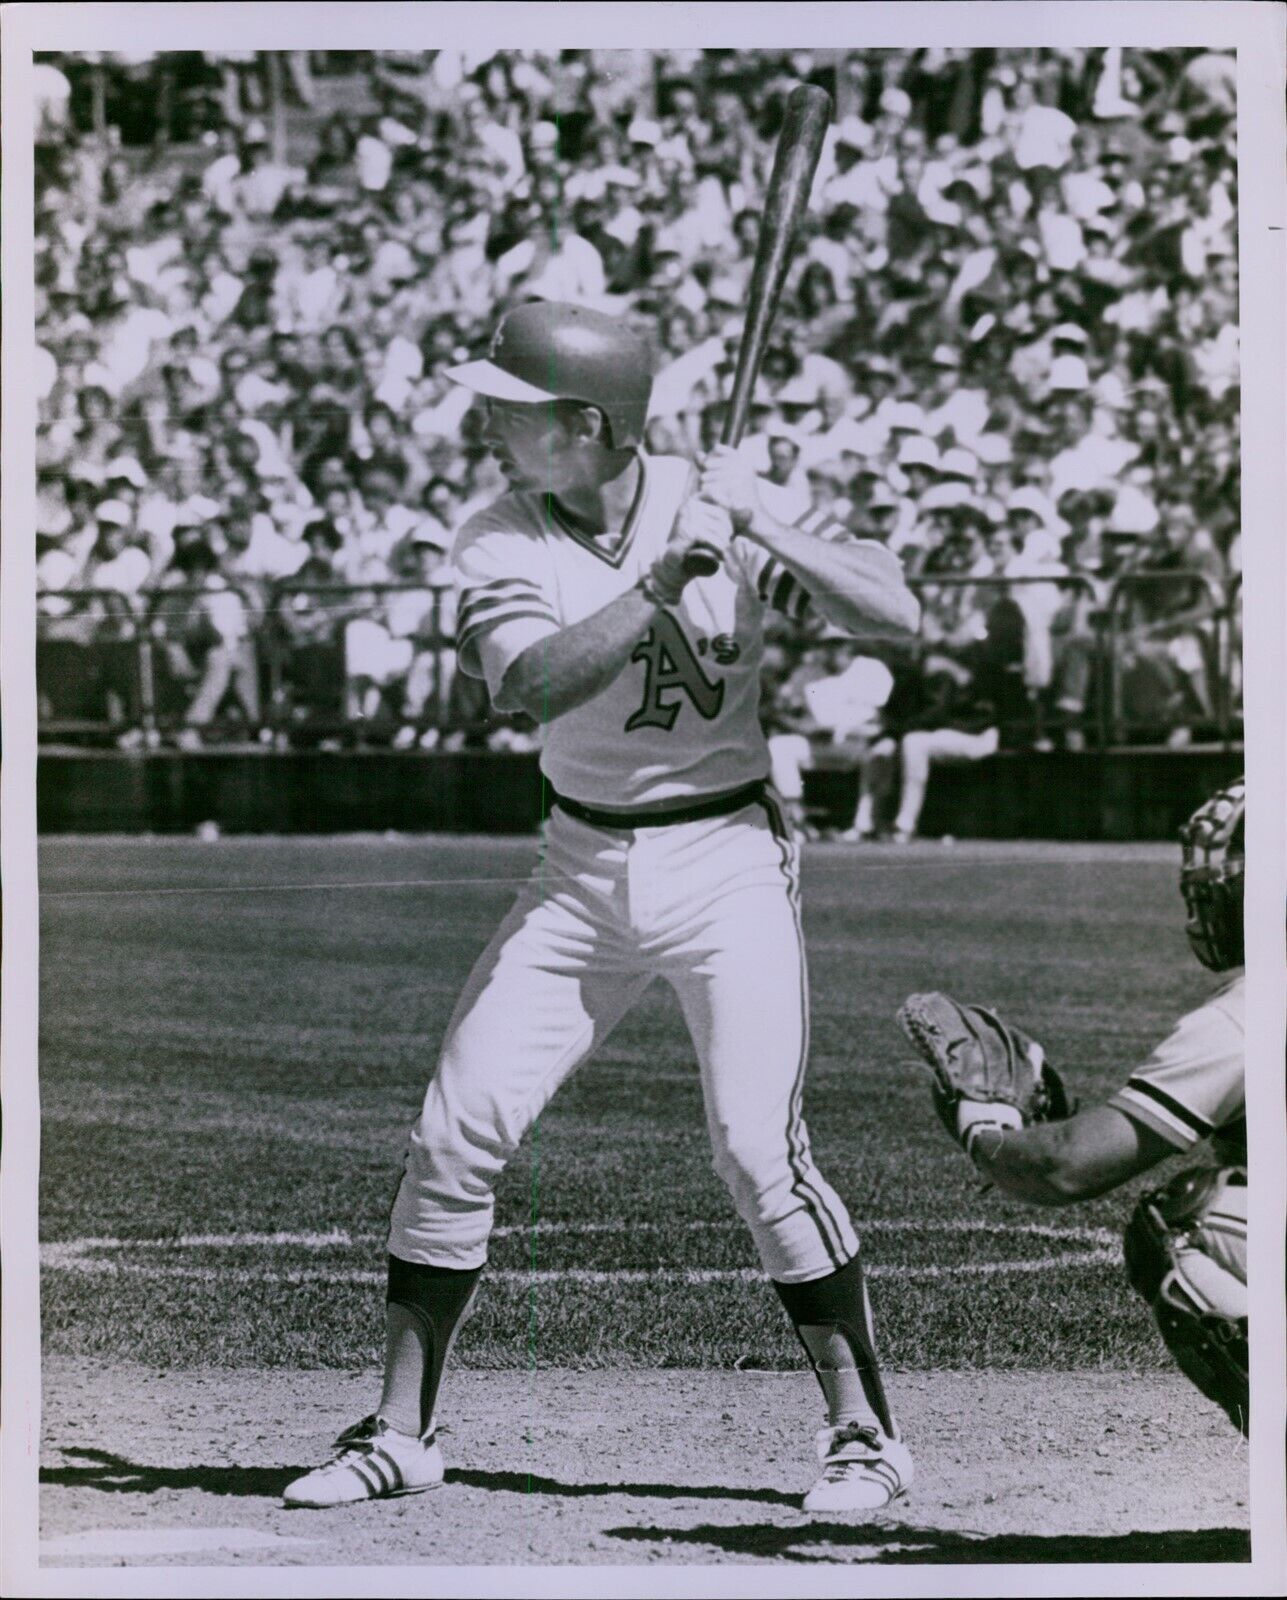 LG767 1981 Orig Russ Reed Photo KEITH DRUMRIGHT Oakland A's Infielder Baseball